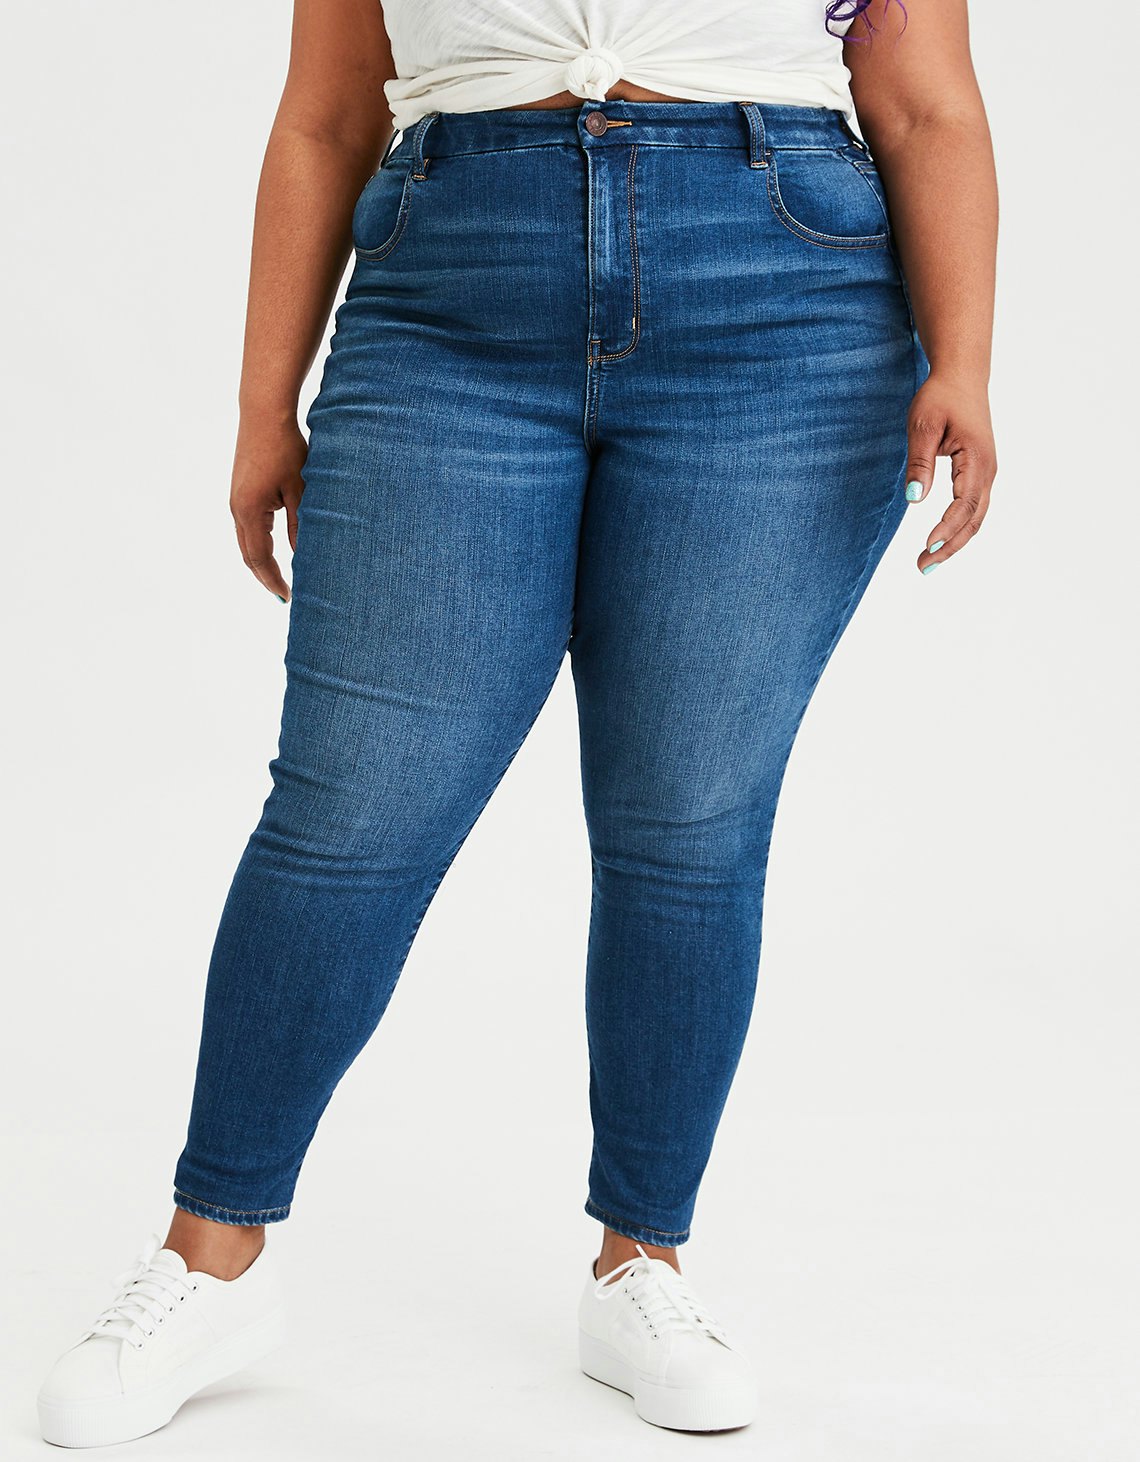 American Eagle's Curvy Jean Line Goes Up To A Size 24 For The First Time  Ever